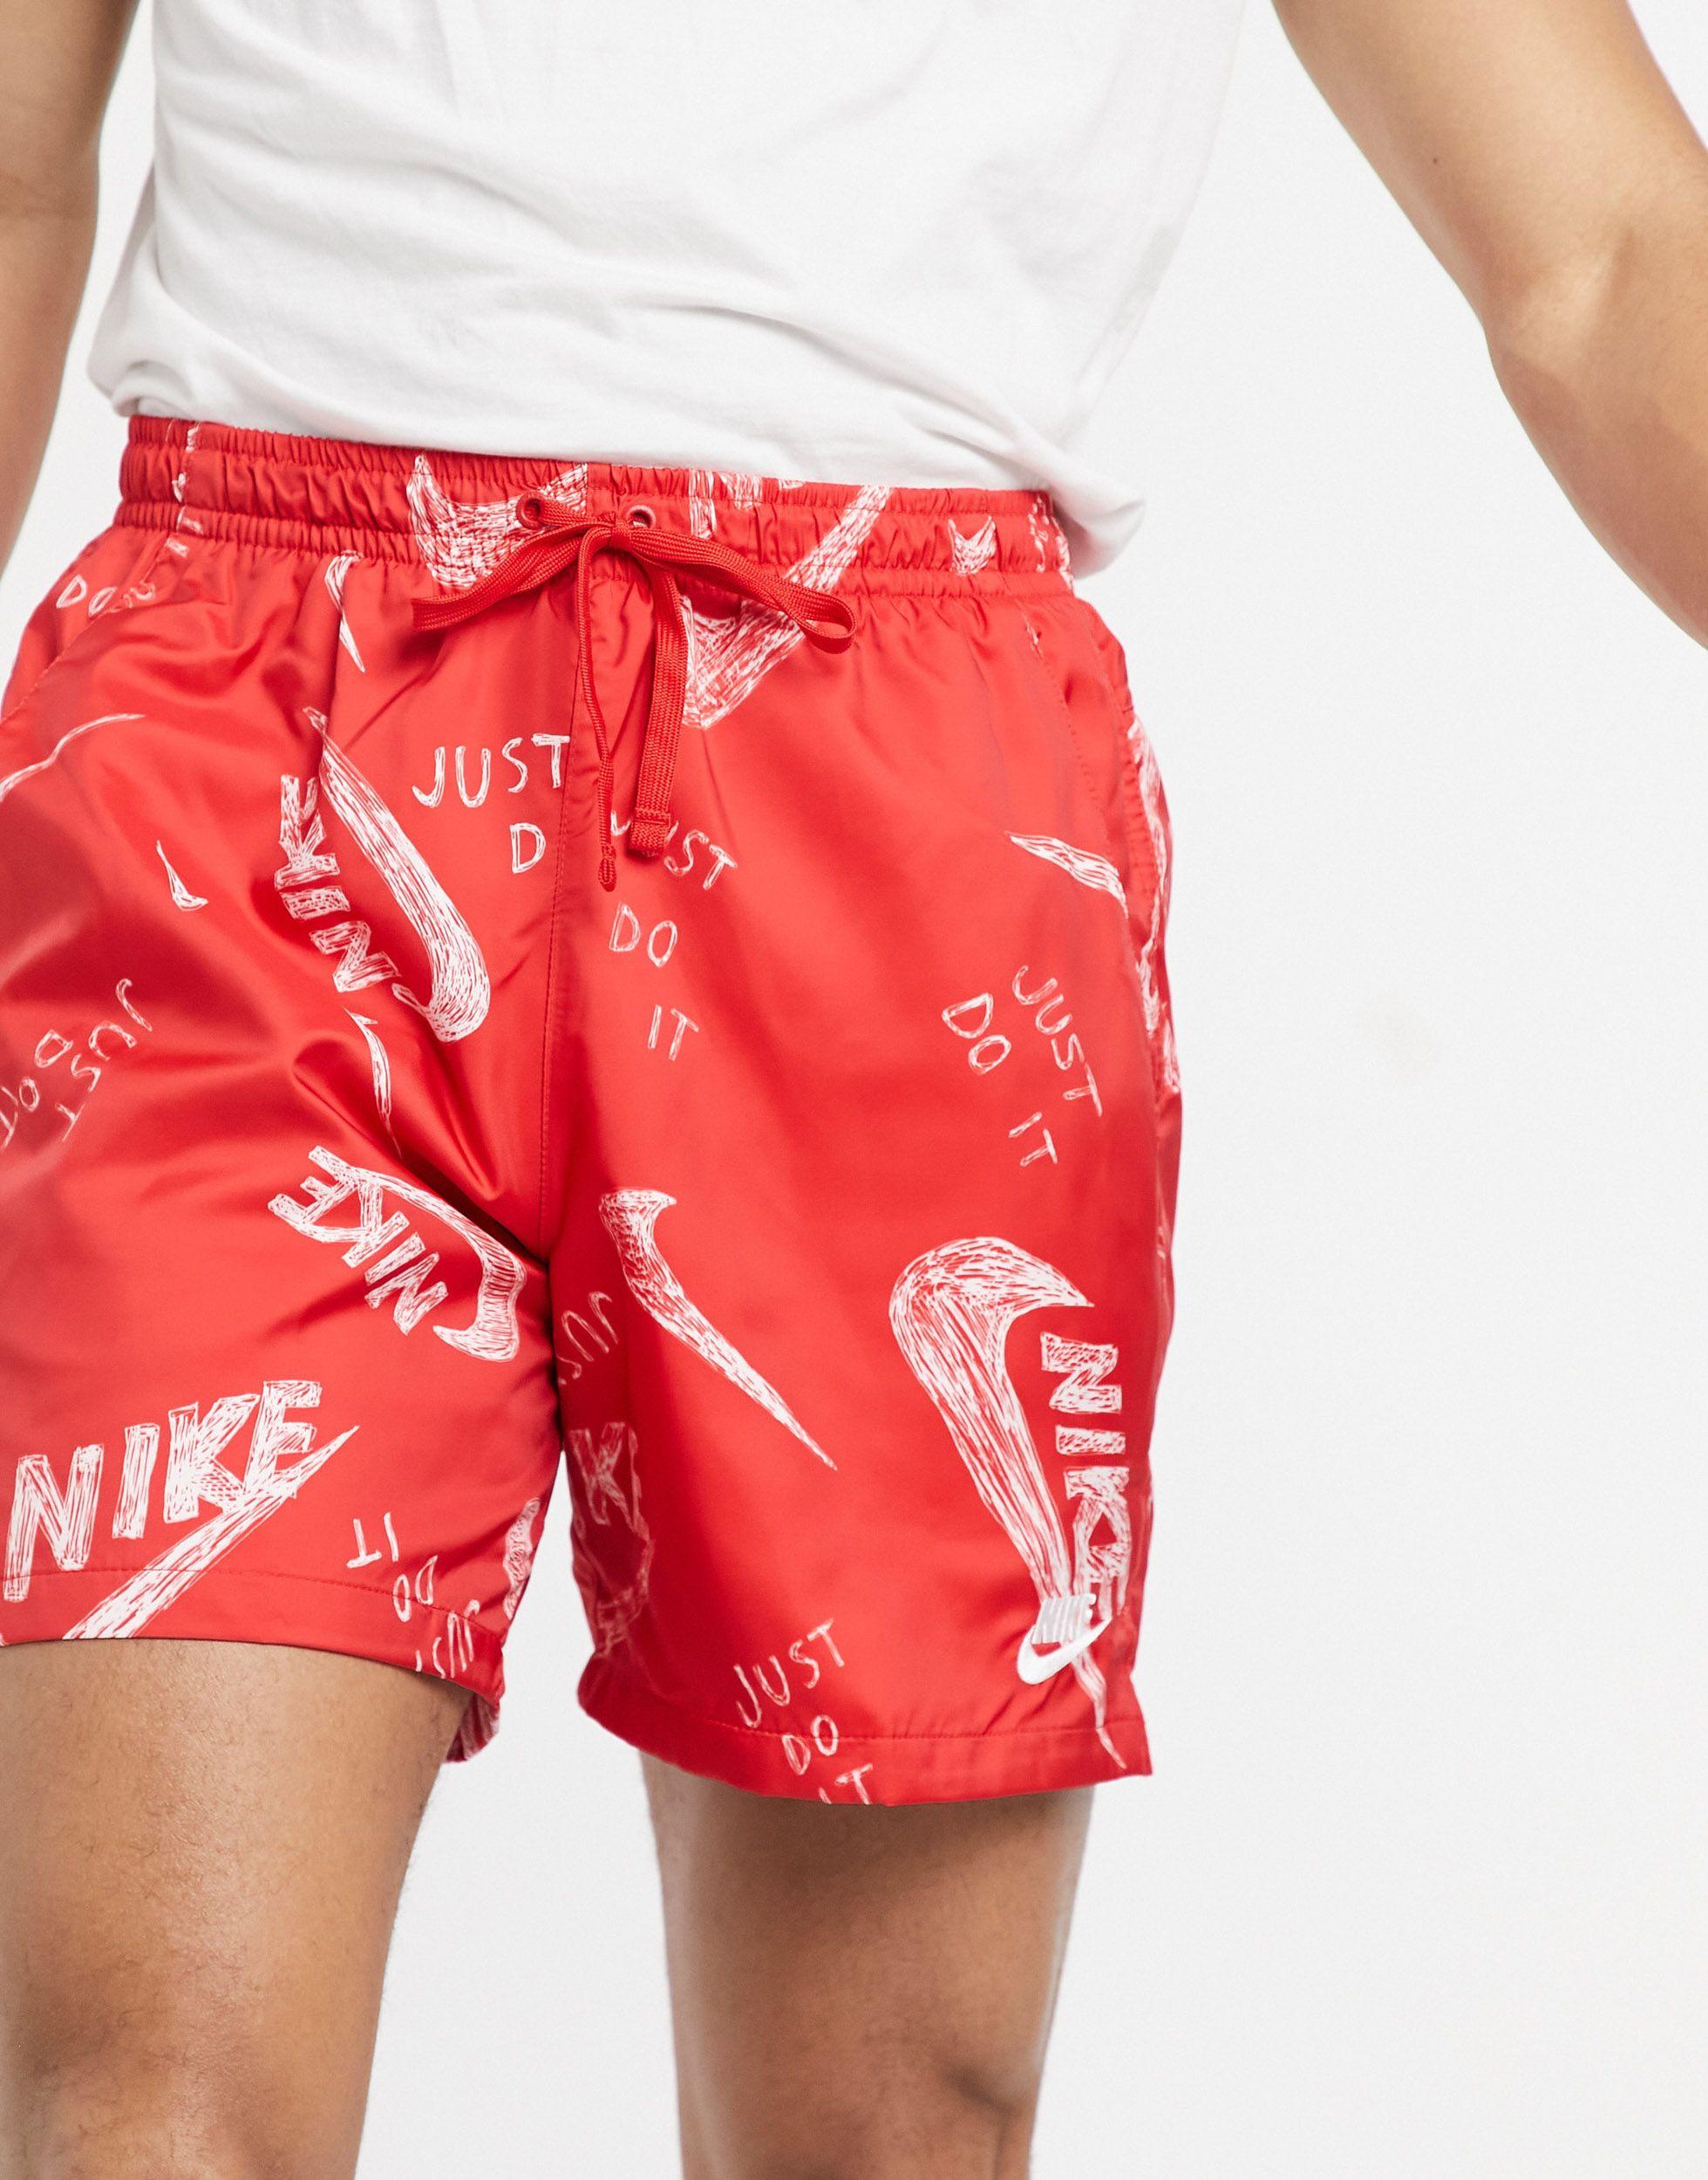 Nike All Over Logo Print Woven Shorts in Red for Men - Lyst